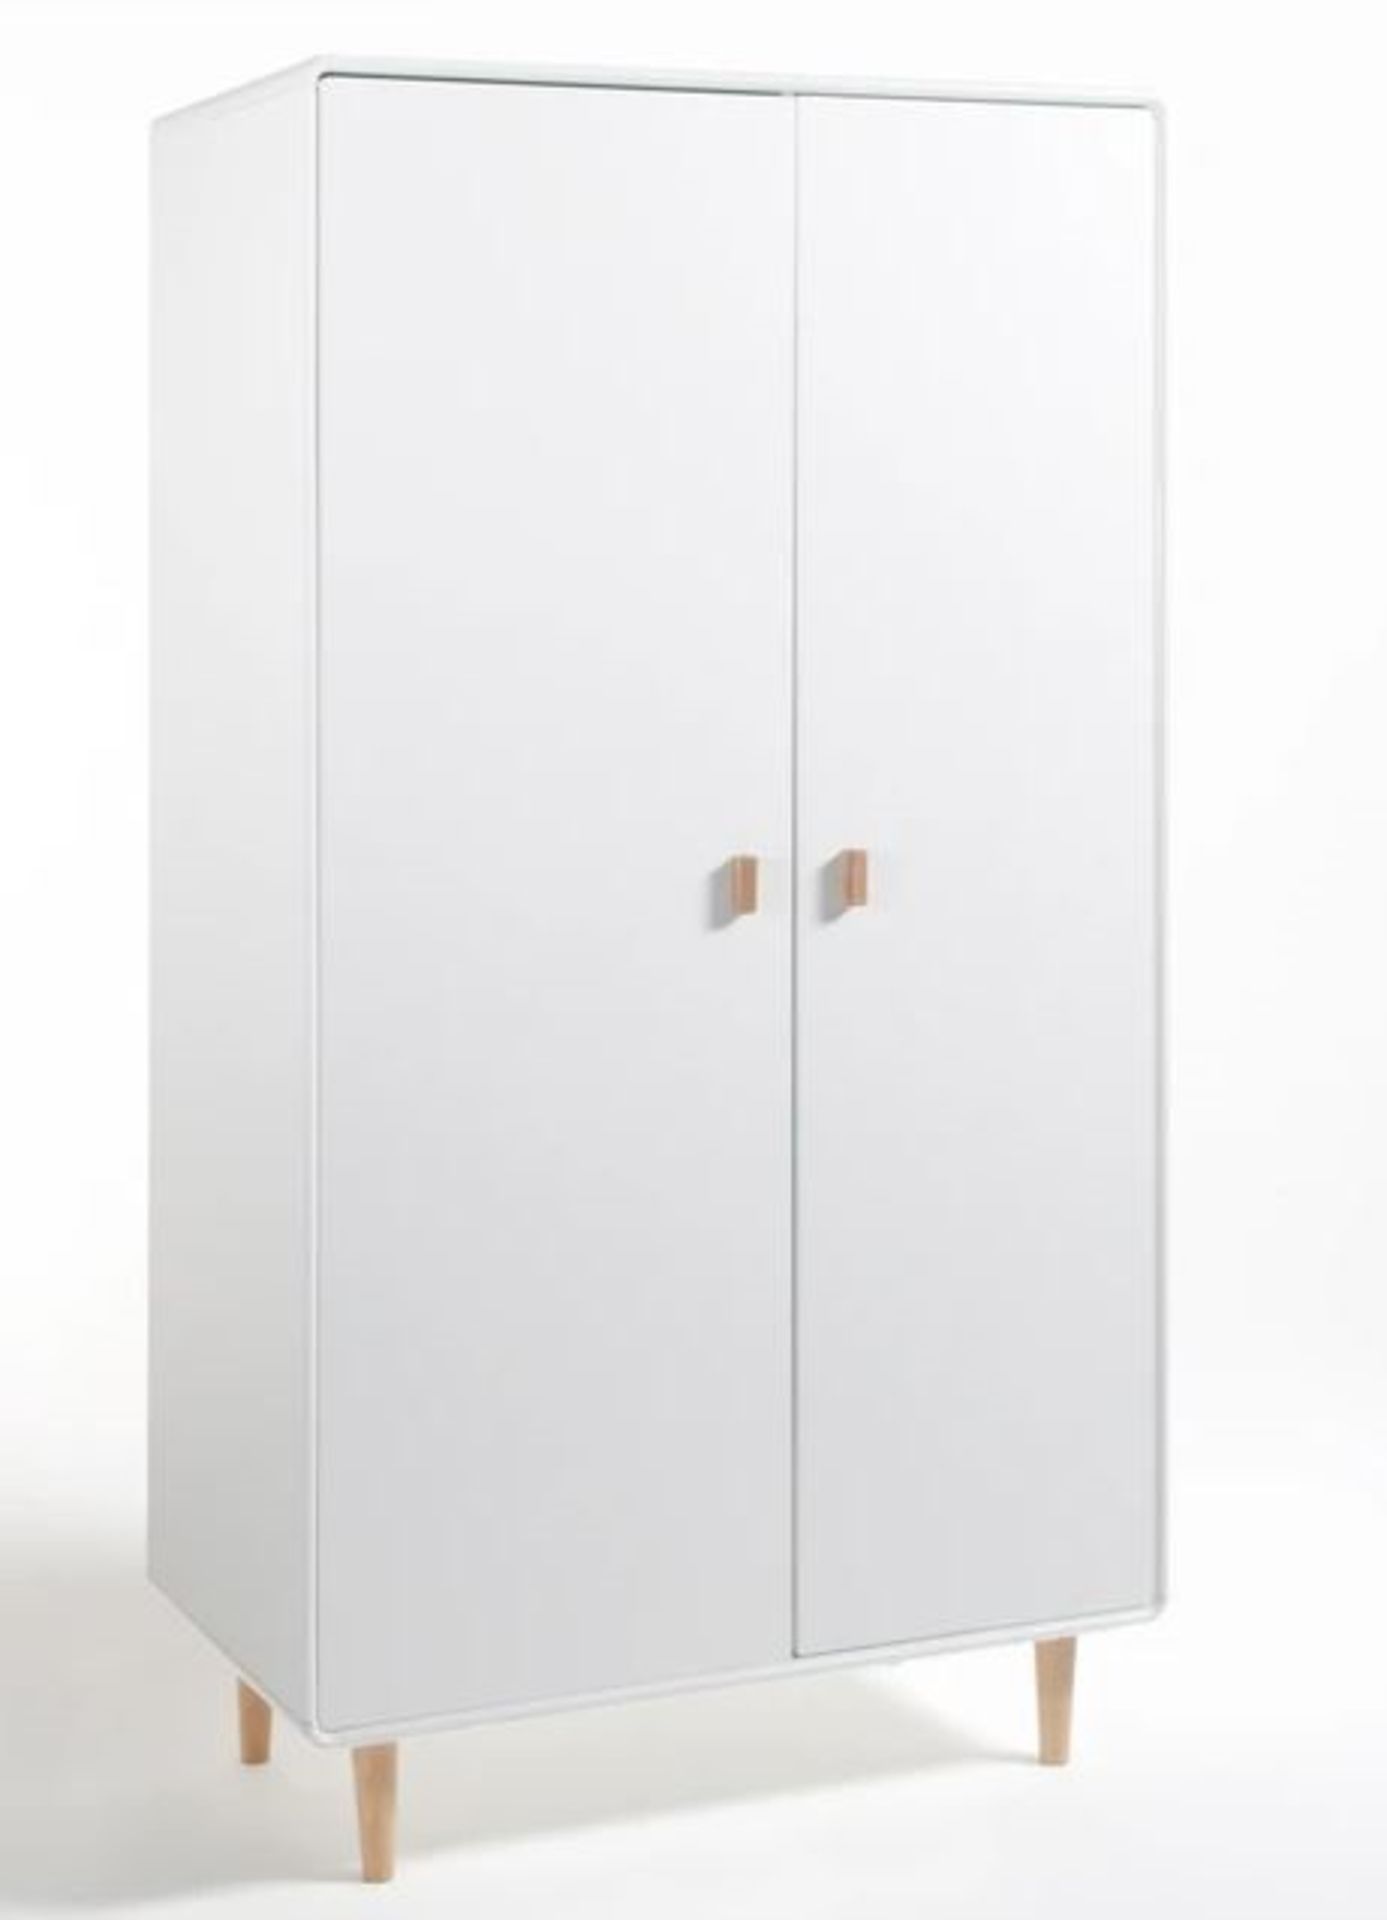 1 GRADE B BOXED JIMI 2 DOOR WARDROBE IN WHITE / RRP £525.00 (PUBLIC VIEWING AVAILABLE)